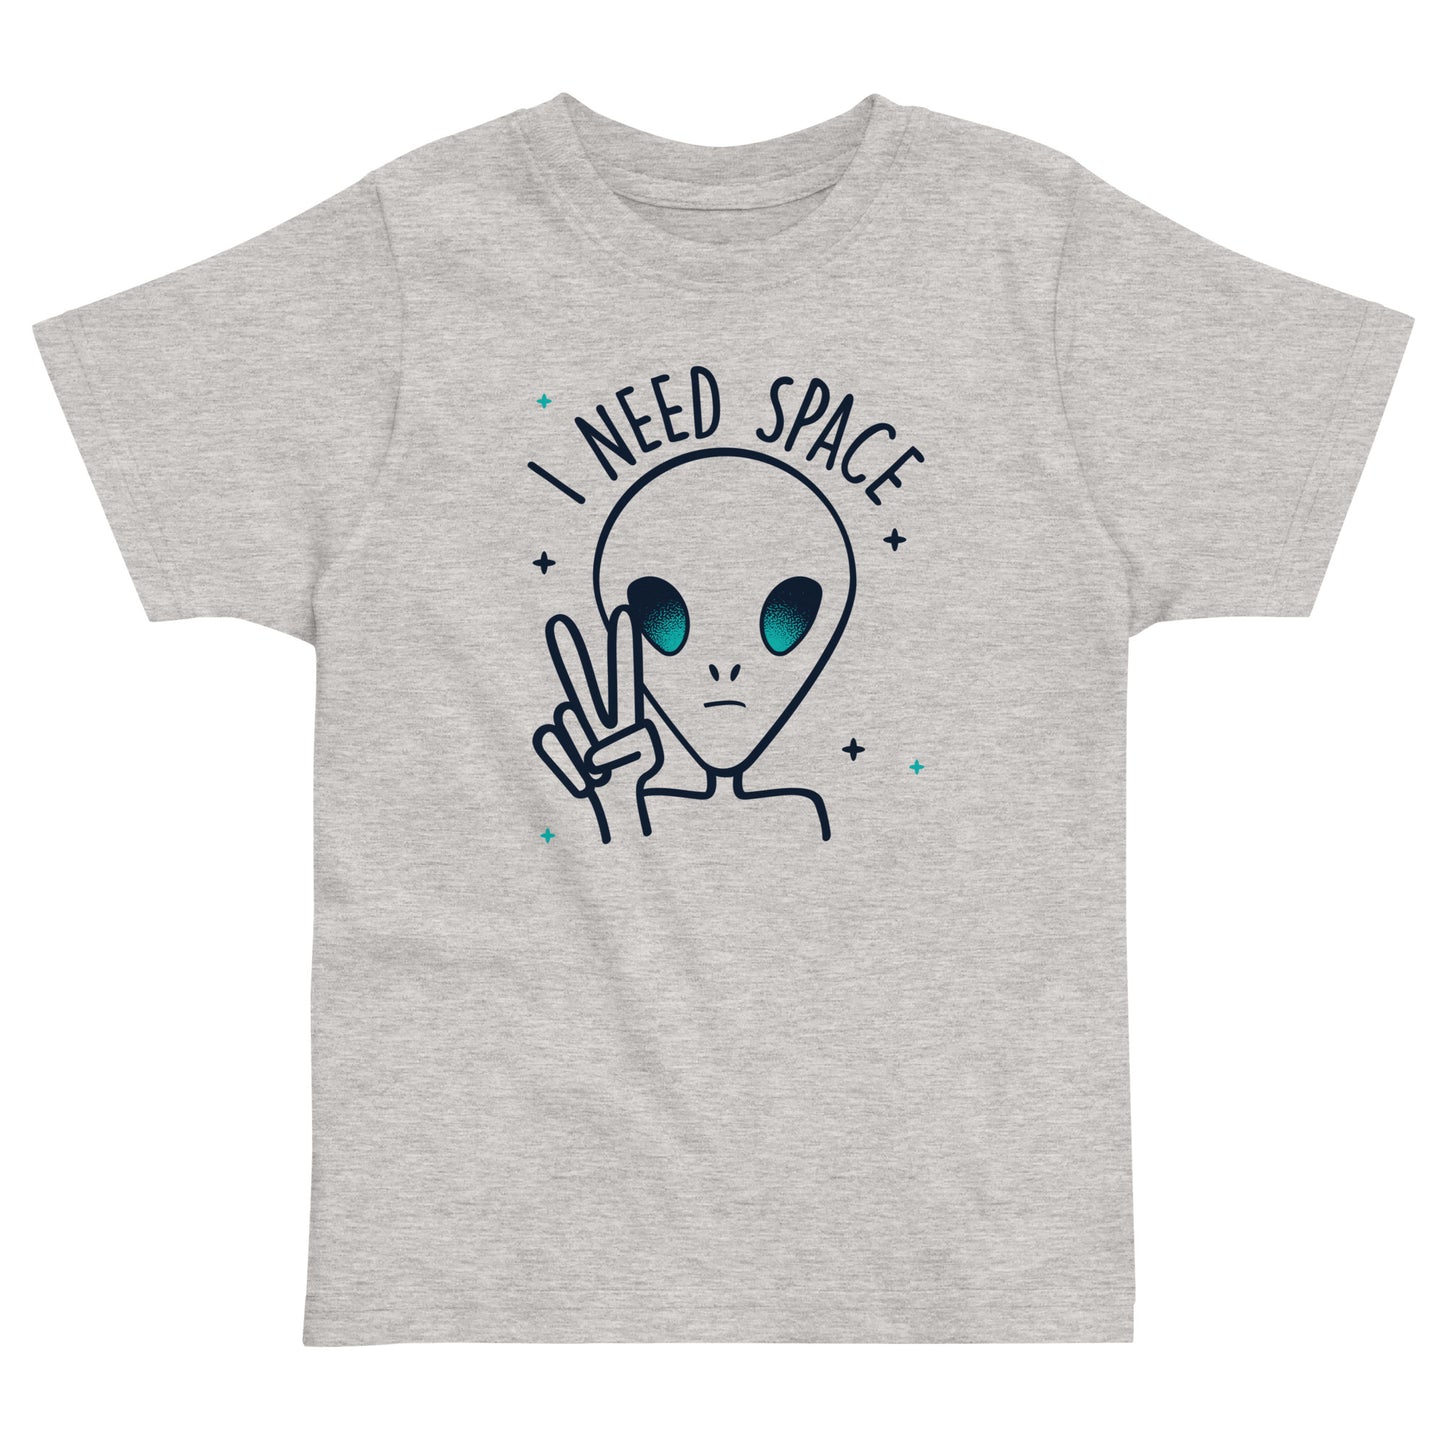 I Need Space Kid's Toddler Tee